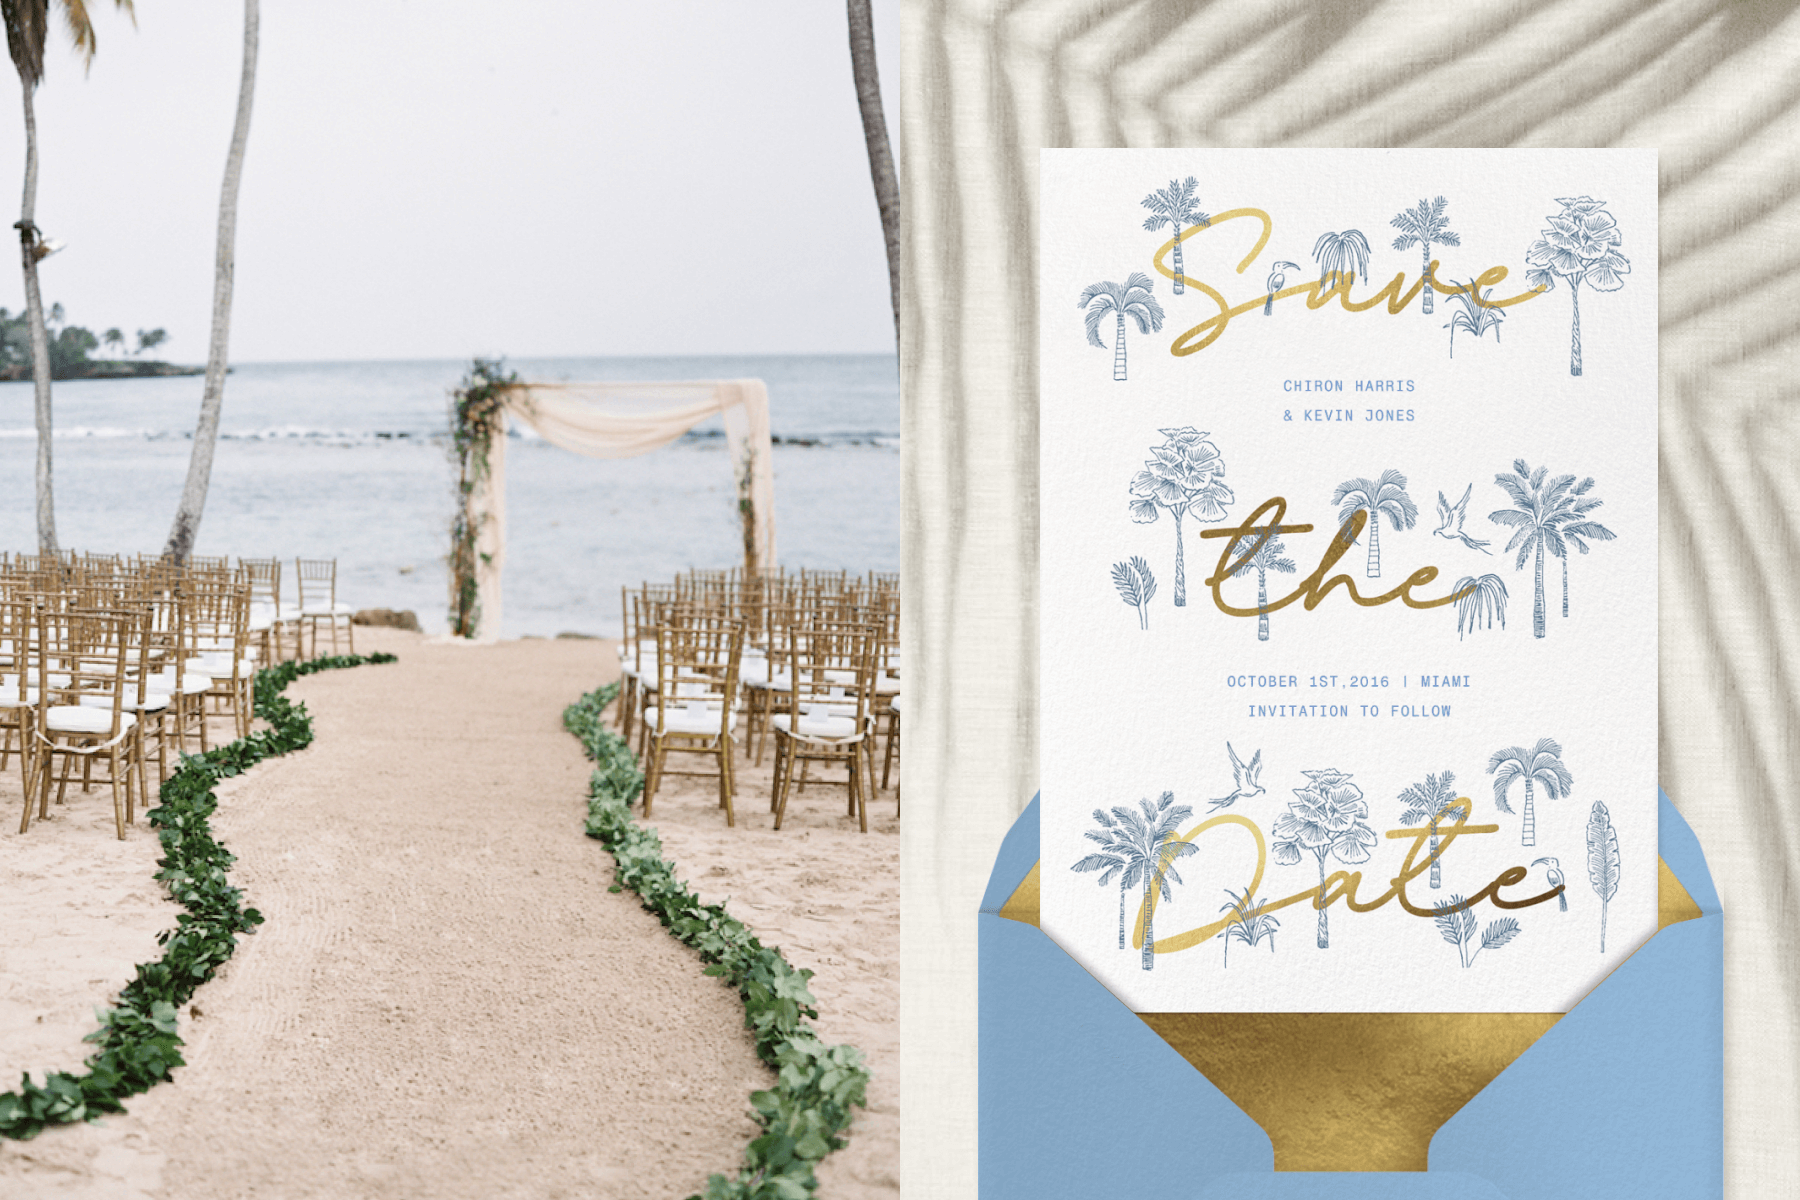 Left: An altar is set for a tropical beach wedding ceremony, with a path created on the sand using leafy boughs, chairs on each side, and a fabric-draped arch. Right: A white card with “save the date” written in large gold script and small illustrations in blue of palm trees, tropical plants, and parrots, emerging from a blue envelope with gold liner.